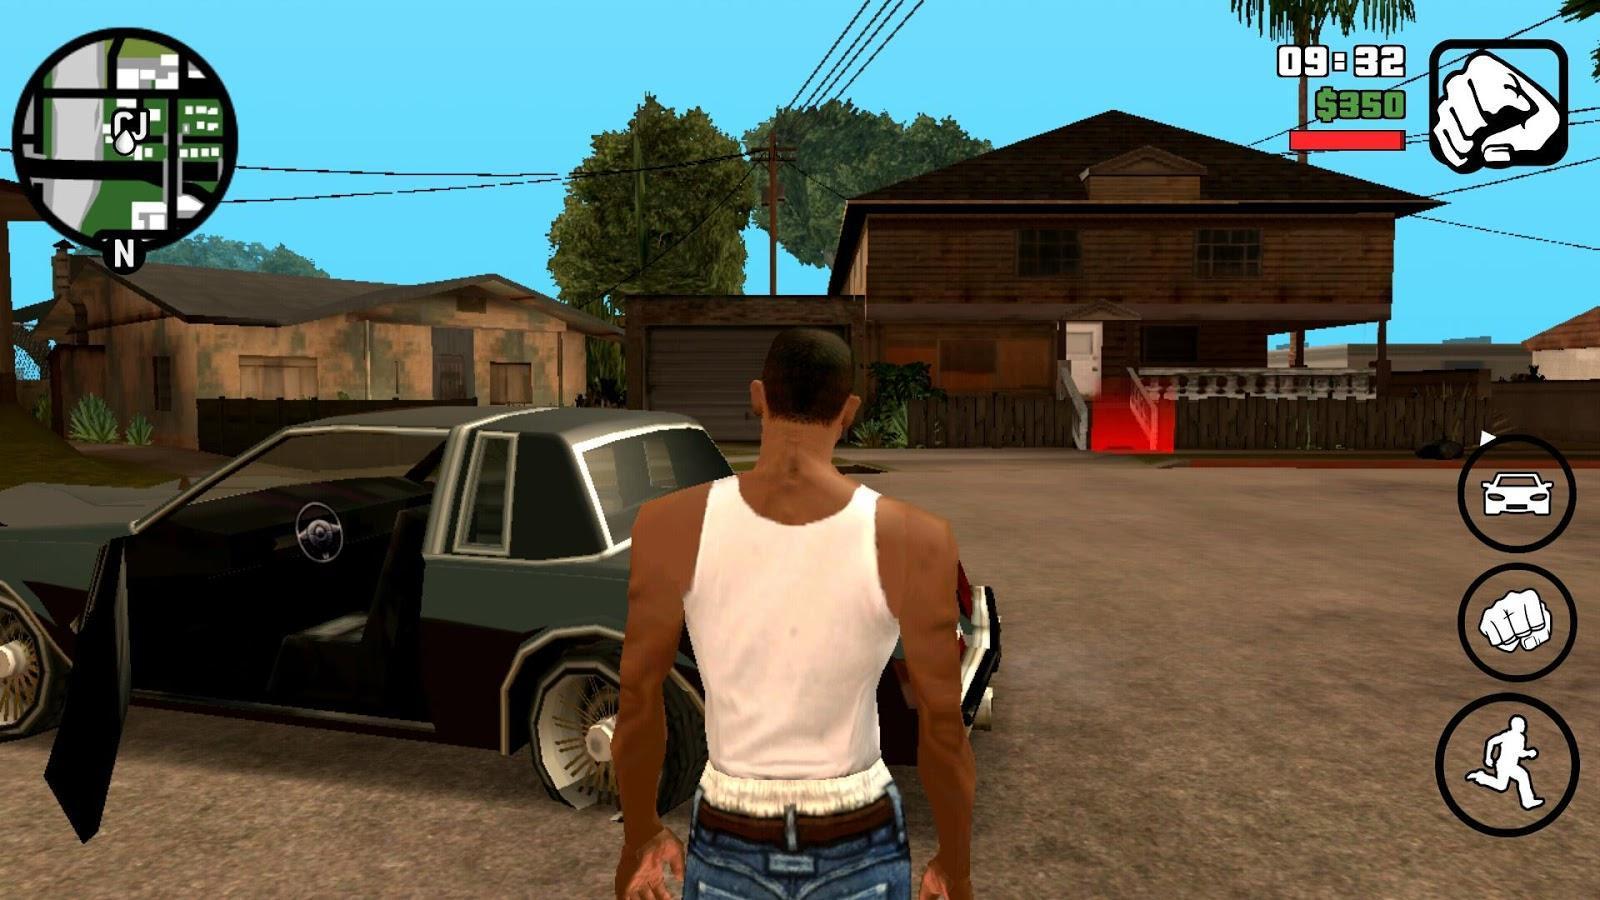 Download gta san andreas for pc free apk